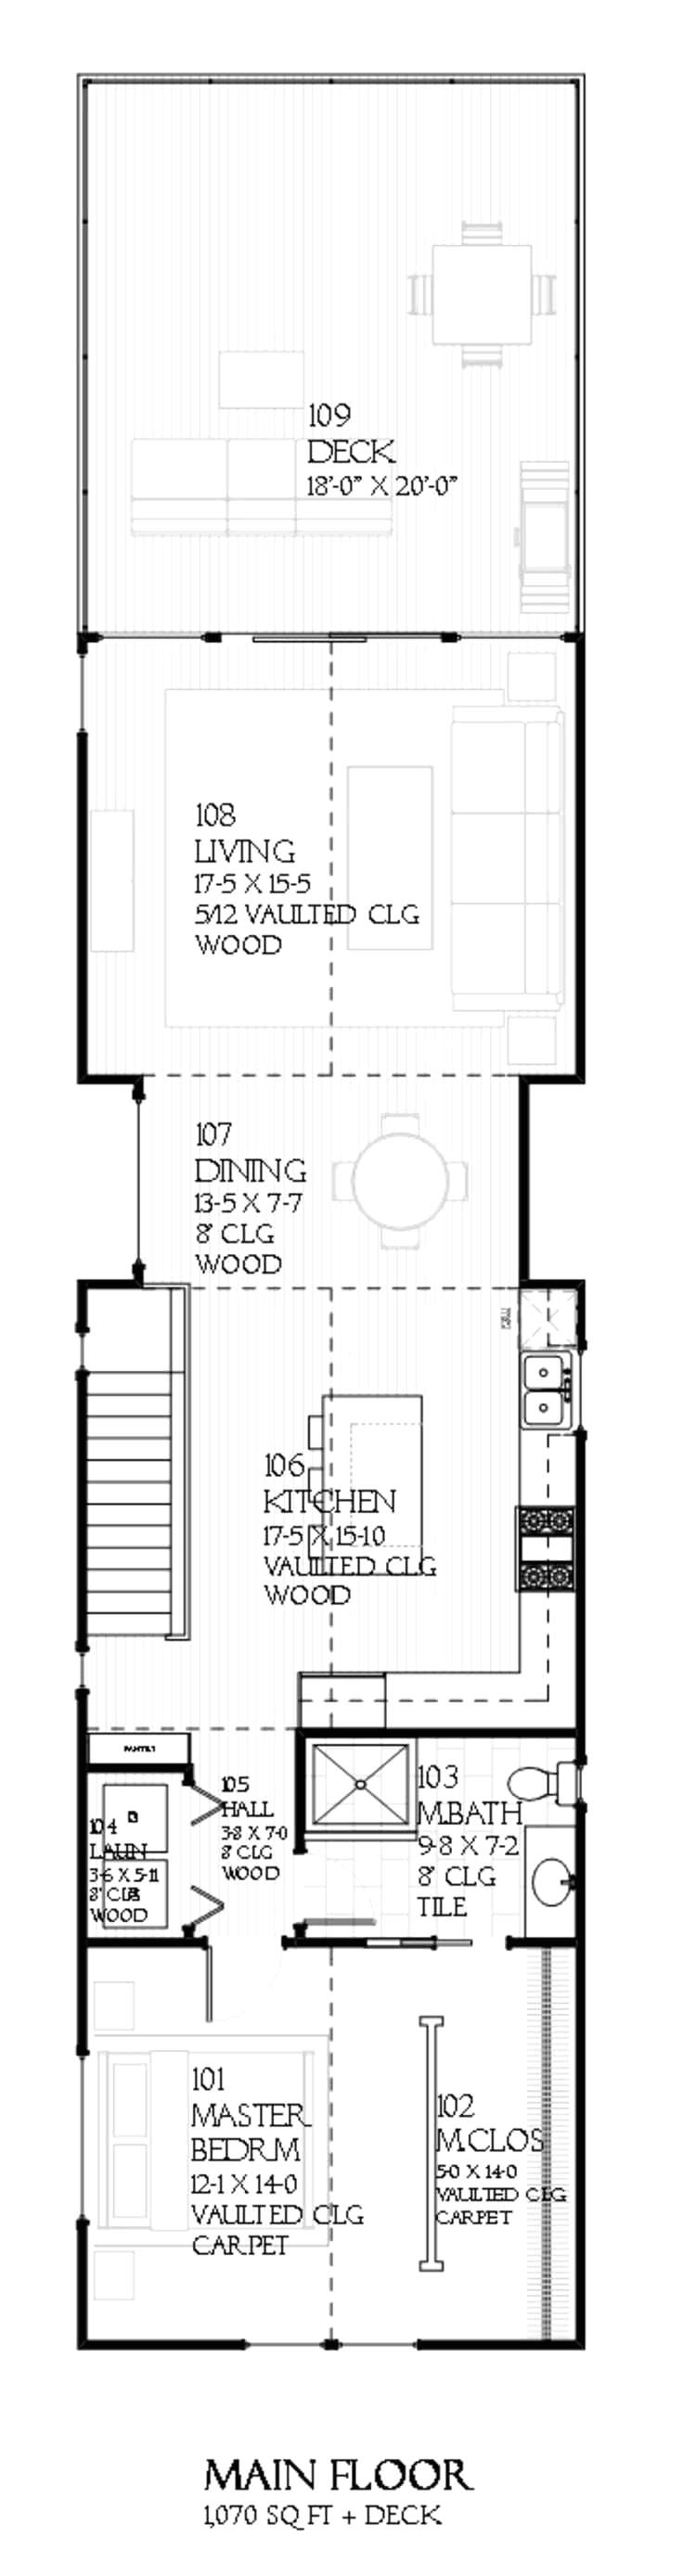 Home Plans X 40 Home And Aplliances